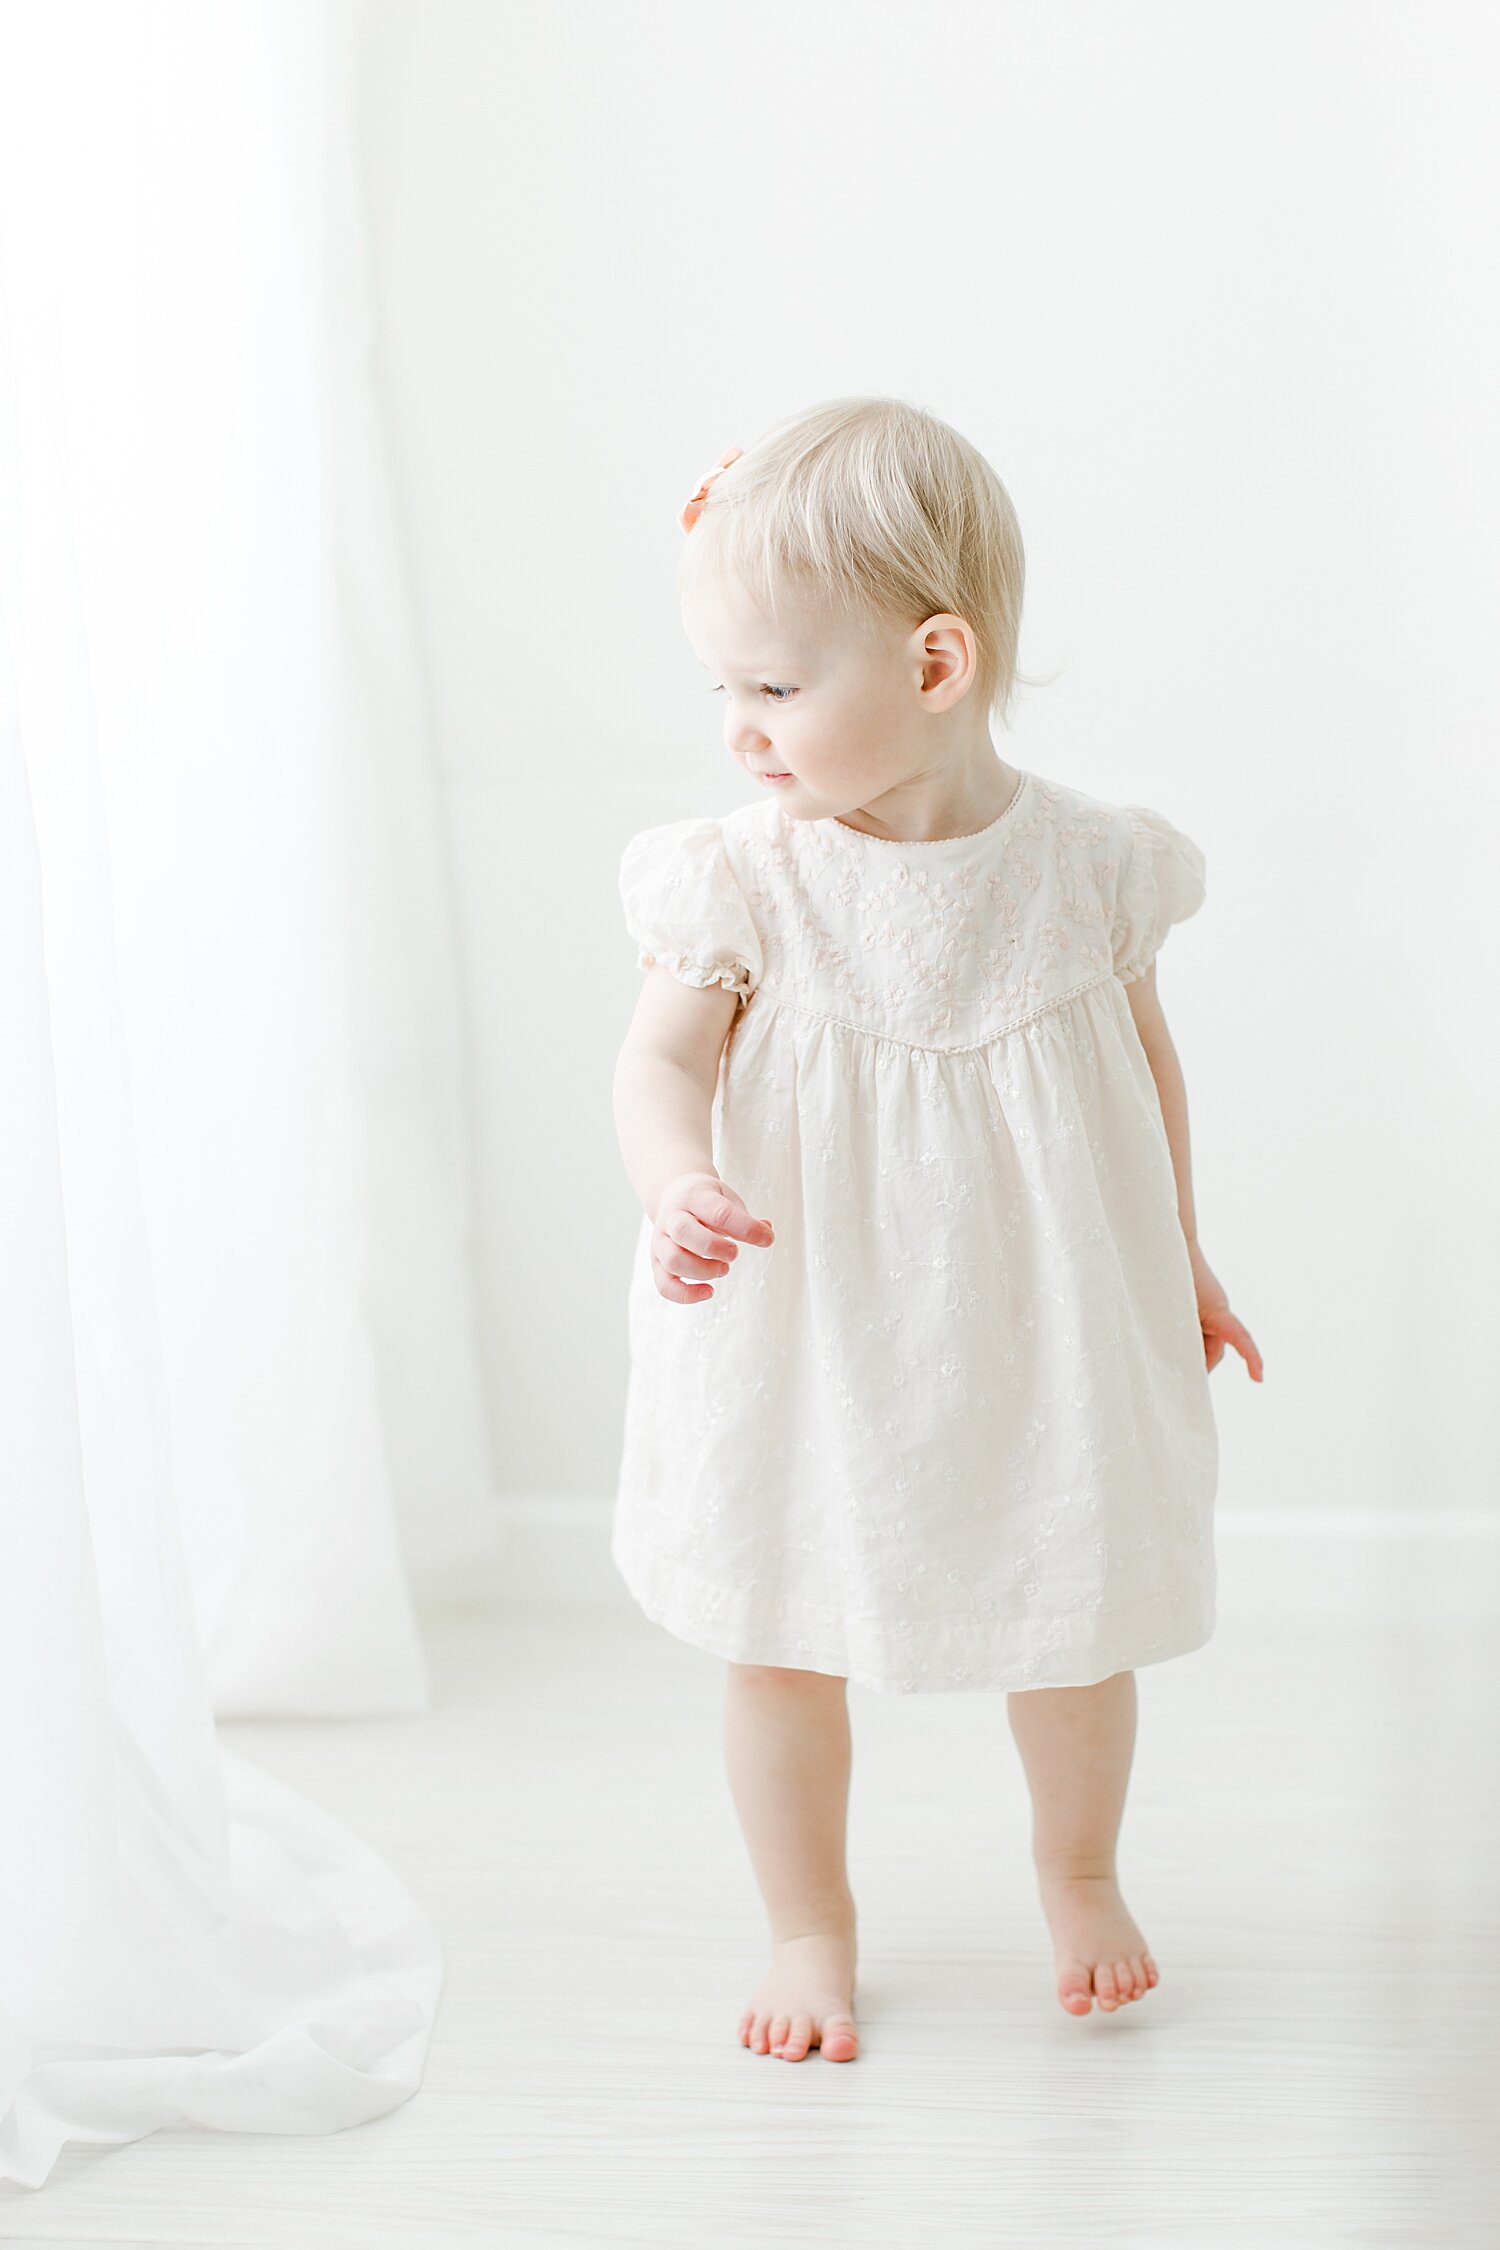 Toddler standing by window in studio for milestone photos with Kristin Wood Photography.